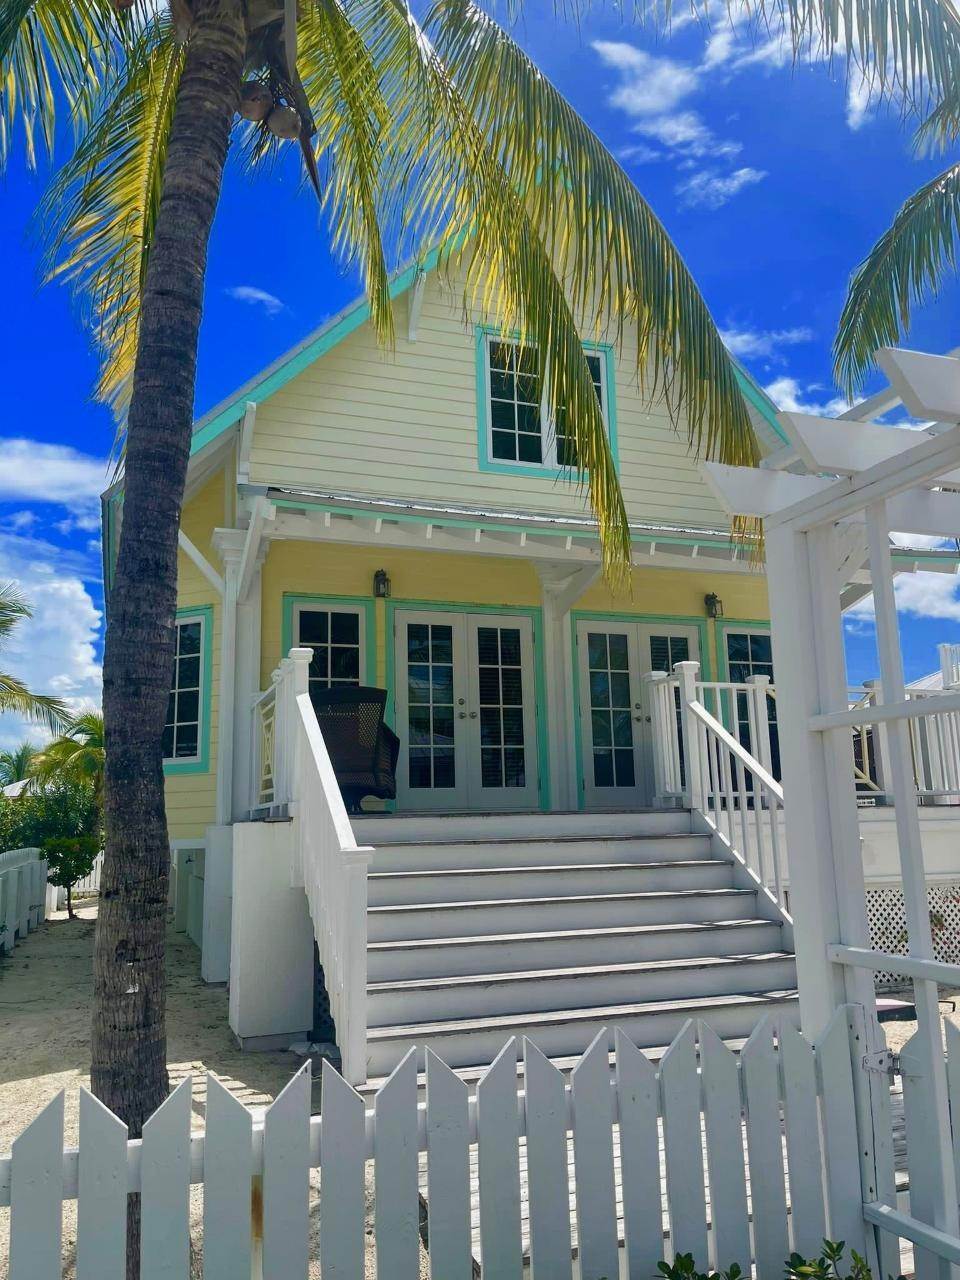 Resort / Hotel for Sale at Chub Cay, Berry Islands Bahamas